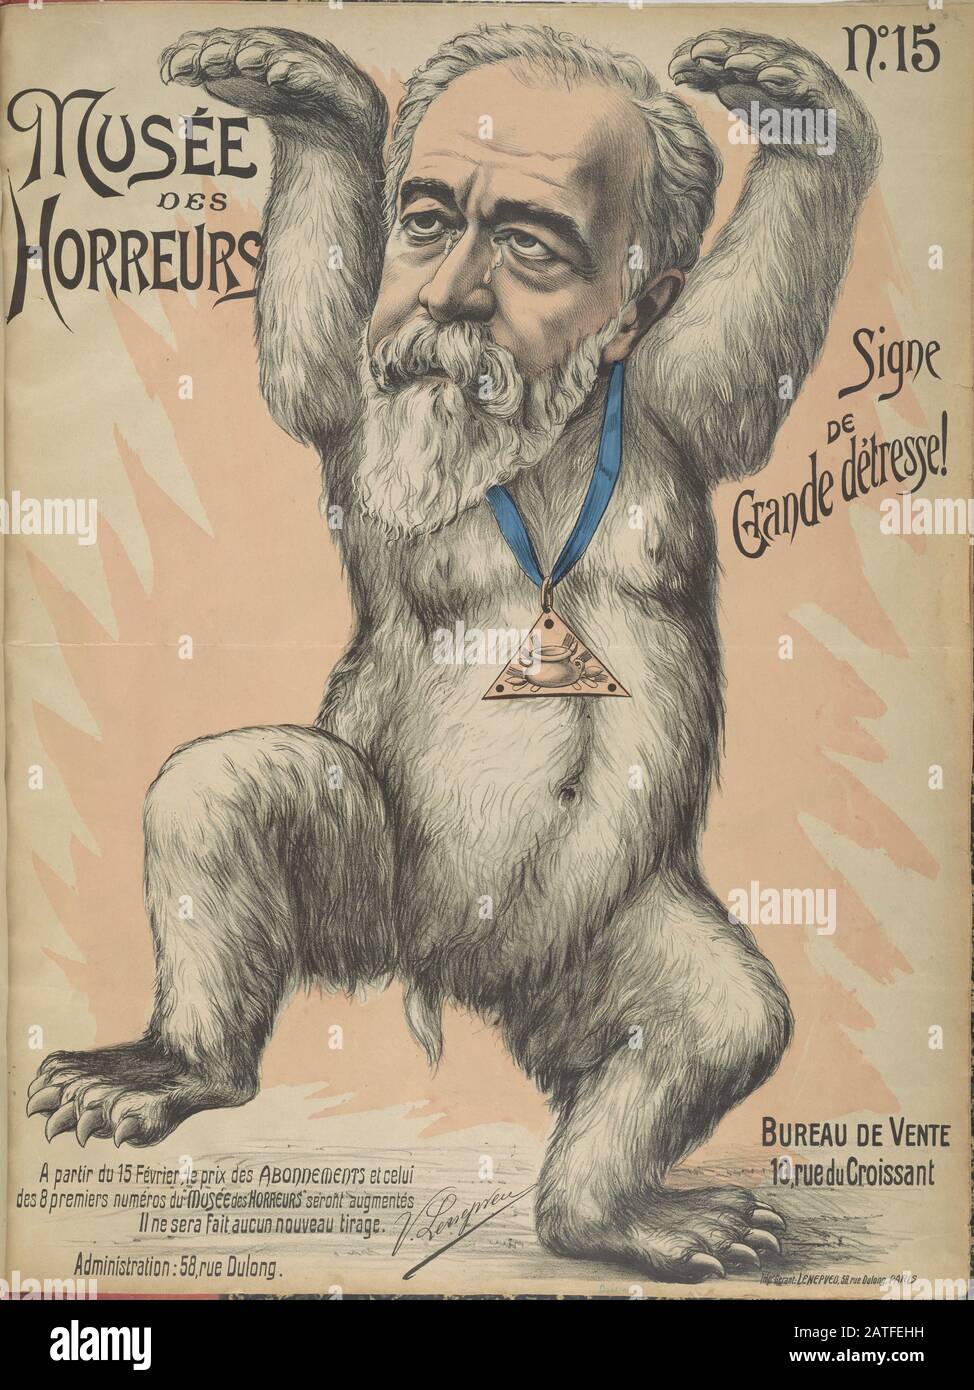 Musée des Horreurs -  No. 15 Signe de Grande détresse!  -  1899  -  Lenepveu, V.  -  Caricature of Henri Brisson (1835-1912) as an ape wearing a necklace. Brisson was a two-time Prime Minister of France and formed a cabinet during the Dreyfus Affair. His ministry was overthrown in October of 1898. Brisson was a supporter of Dreyfus and helped to secure his re-trial. Hand colored. Stock Photo